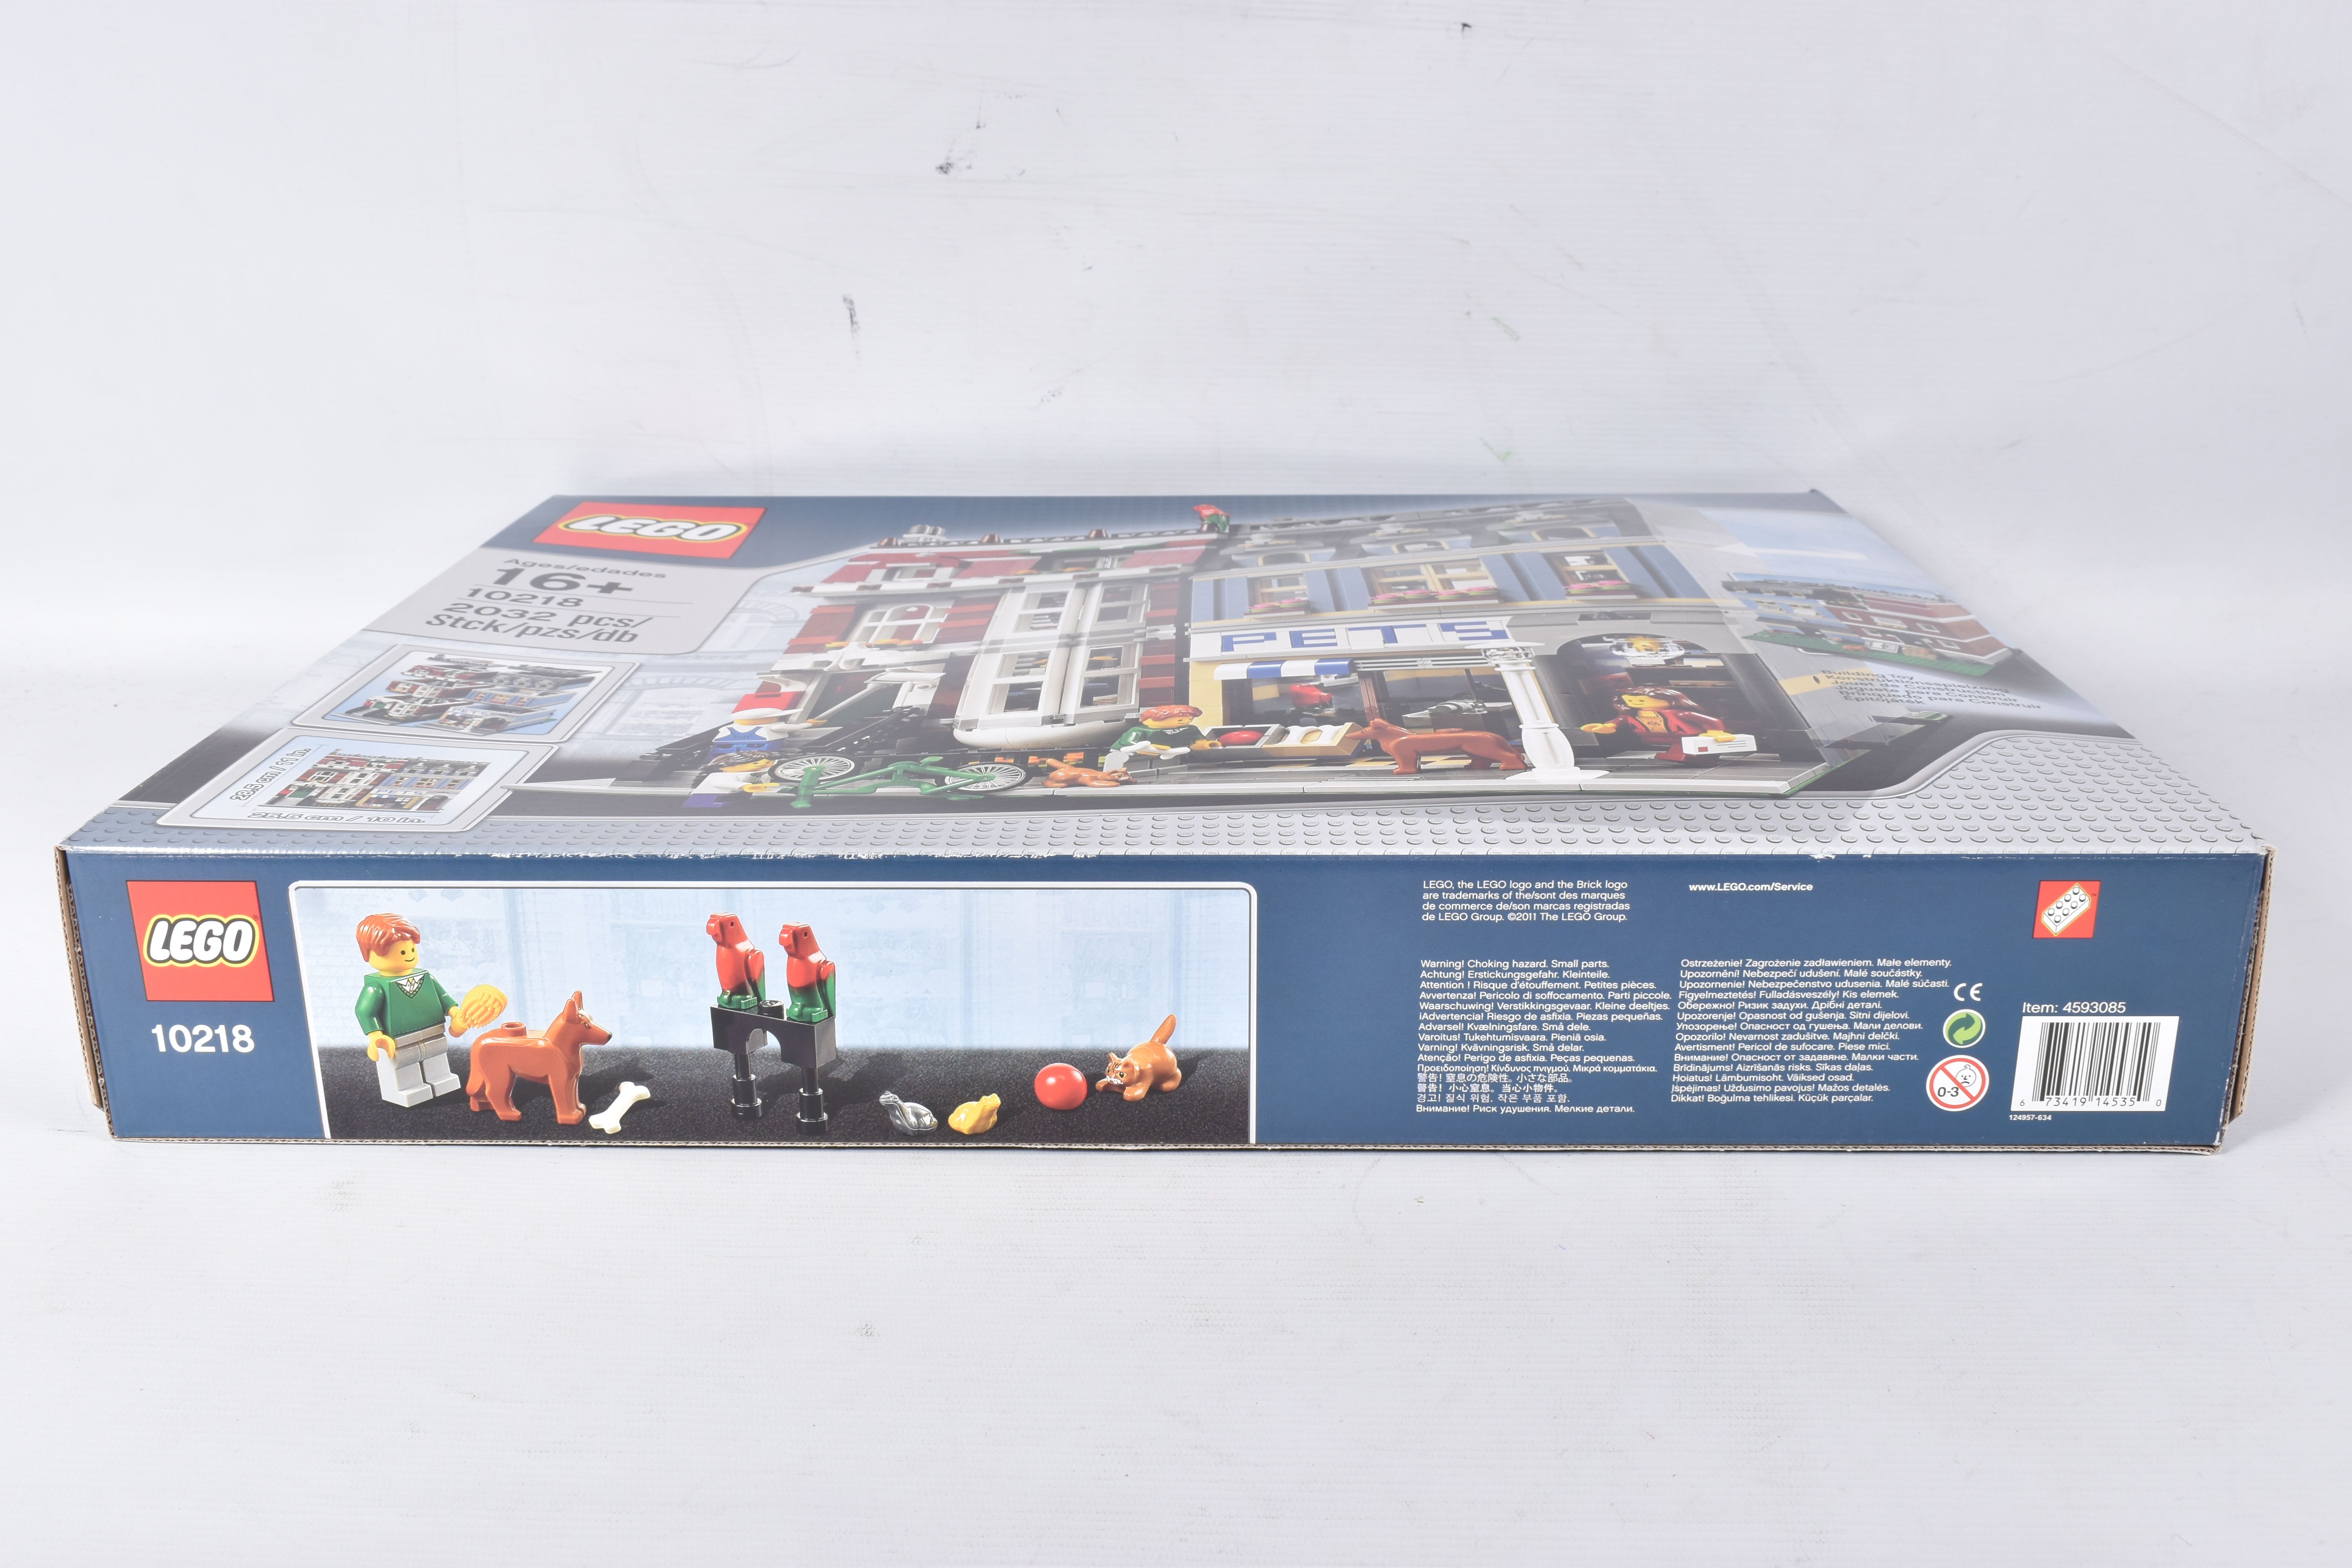 A FACTORY SEALED LEGO CREATOR EXPERT PET SHOP, model no. 10218, 2032 pieces, never opened with - Image 16 of 25